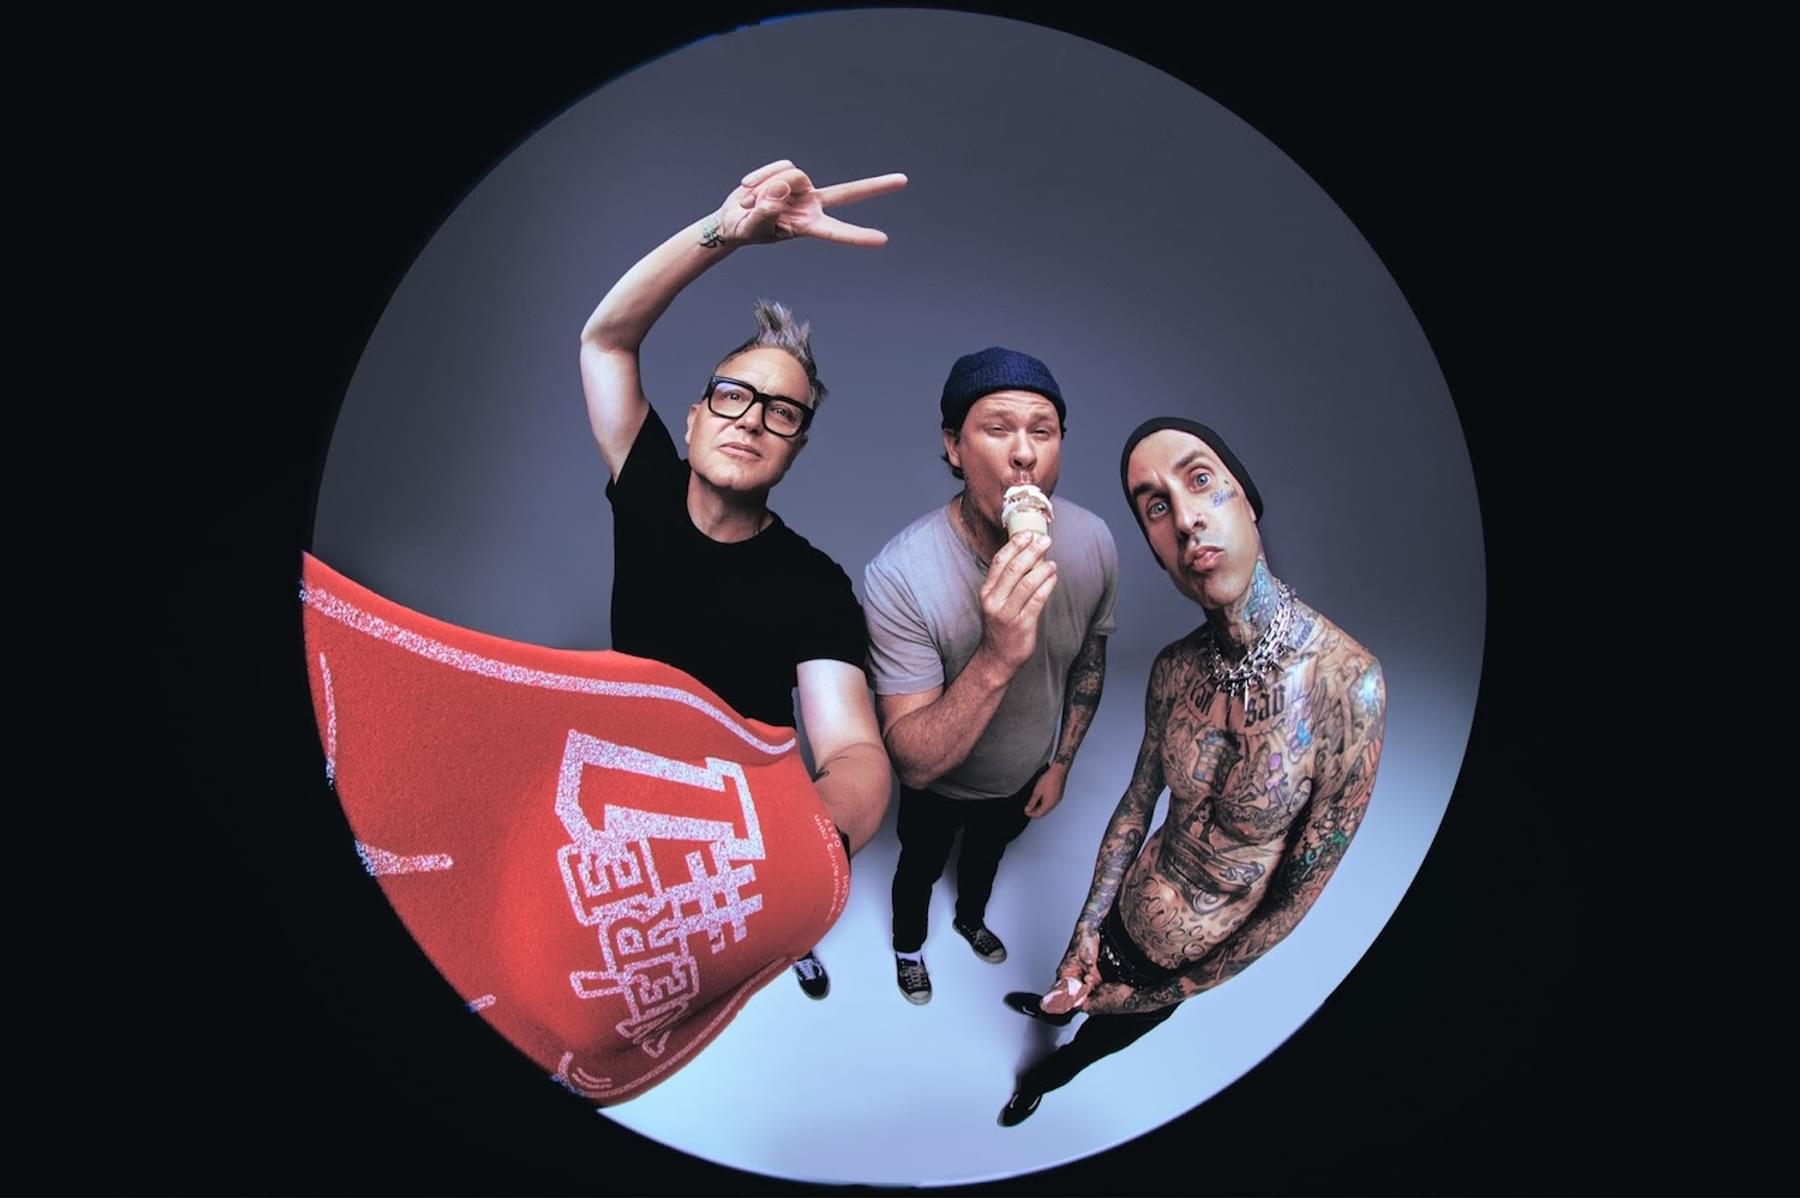 Blink-182 deliver "Edging", their first new song with Tom DeLonge in a